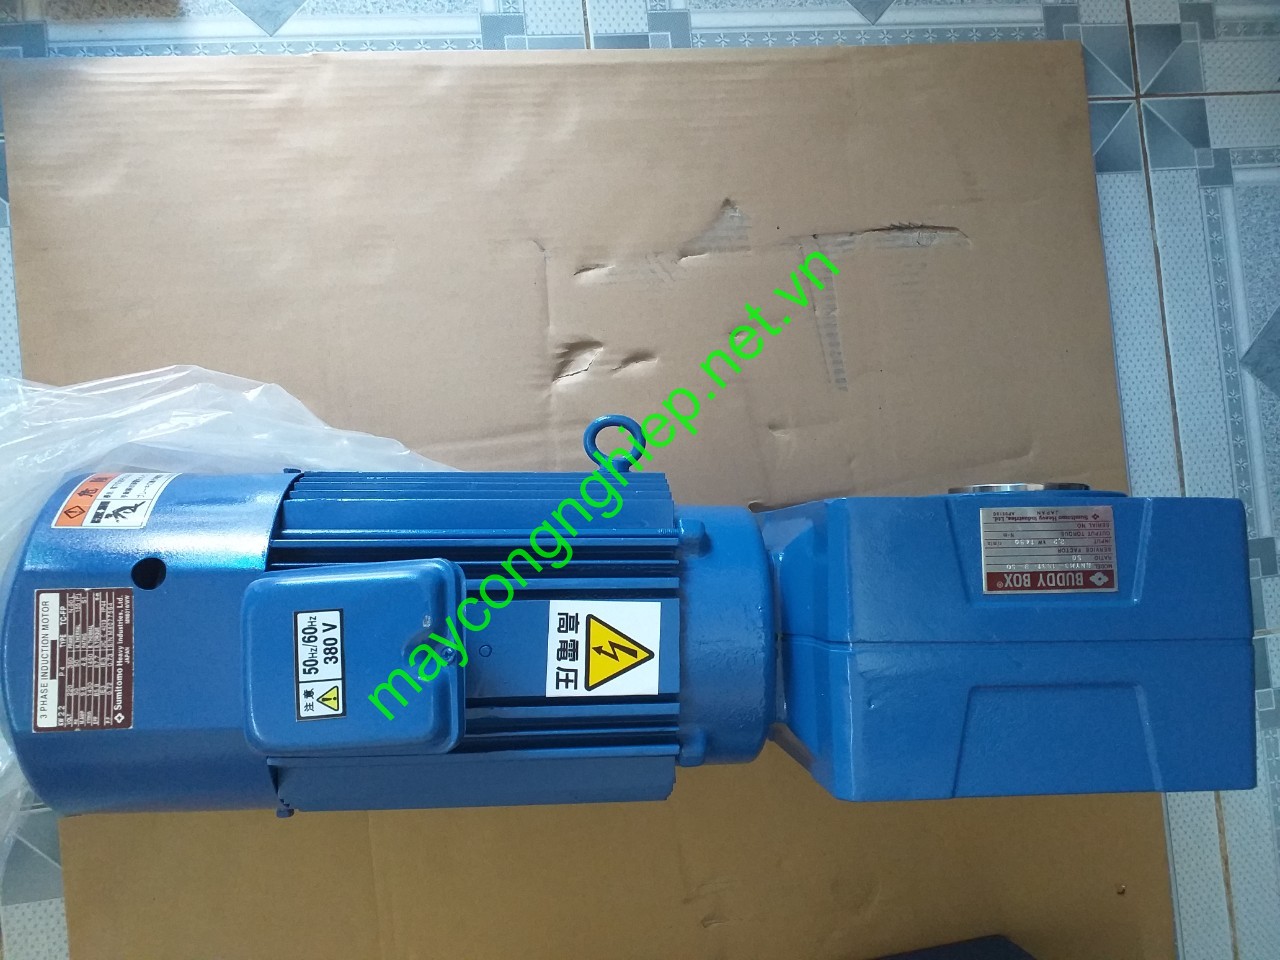 motor-giam-toc-cot-am-sumitomo-hyponic-2-2kw-1-50-2